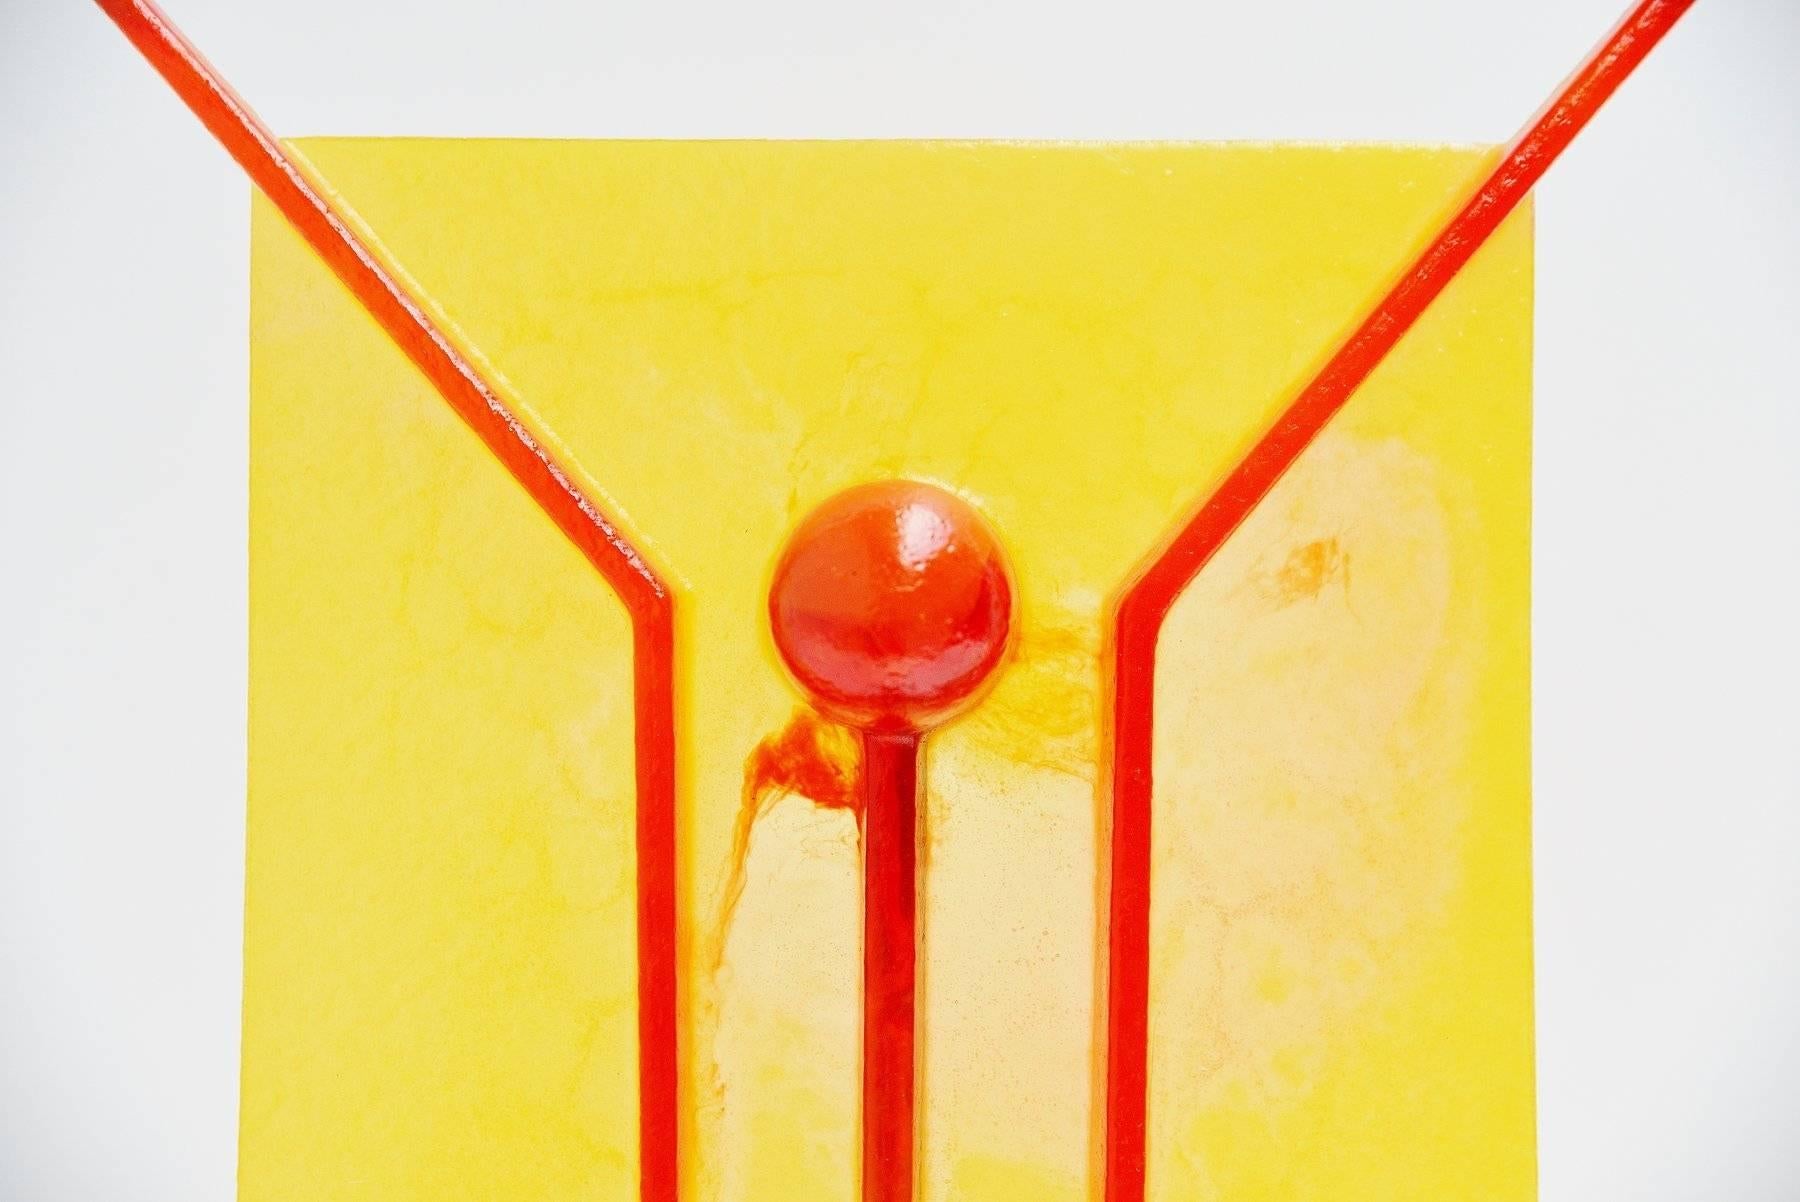 Funny table lamp designed by Gaetano Pesce for Open Sky, United States, 1999. This lamp was made of yellow and red resin and has a black metal support. The lamp uses up to 2 E14 bulbs up to 40 watt each. The lamp gives very nice and warm light when